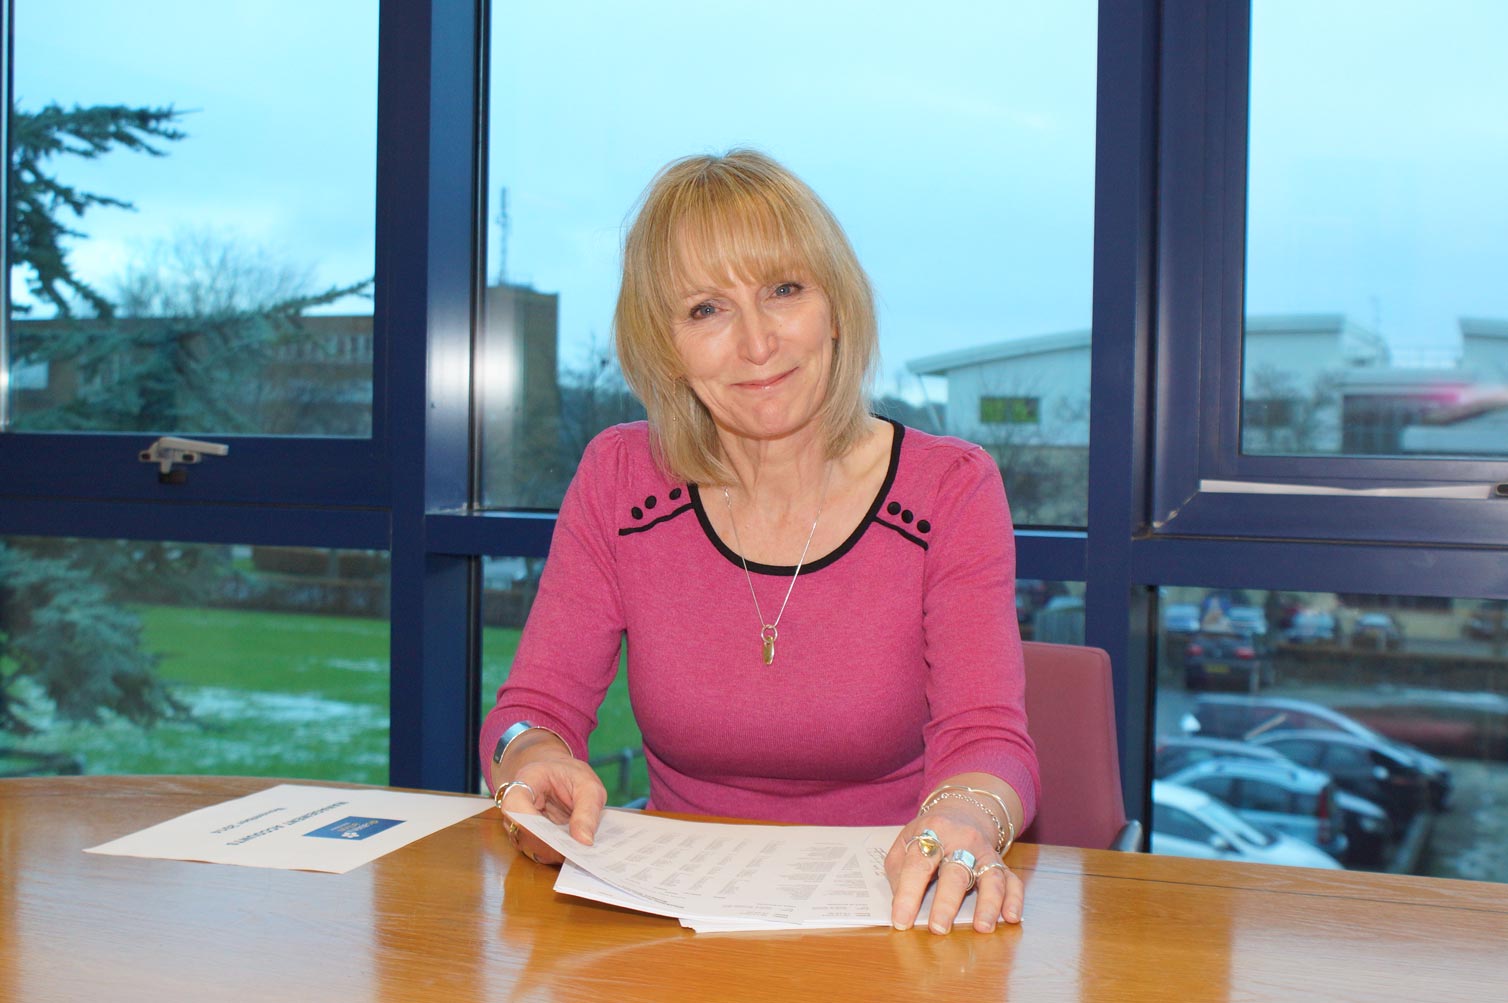 Jackie Snape, Disability Action Yorkshire’s Chief Executive